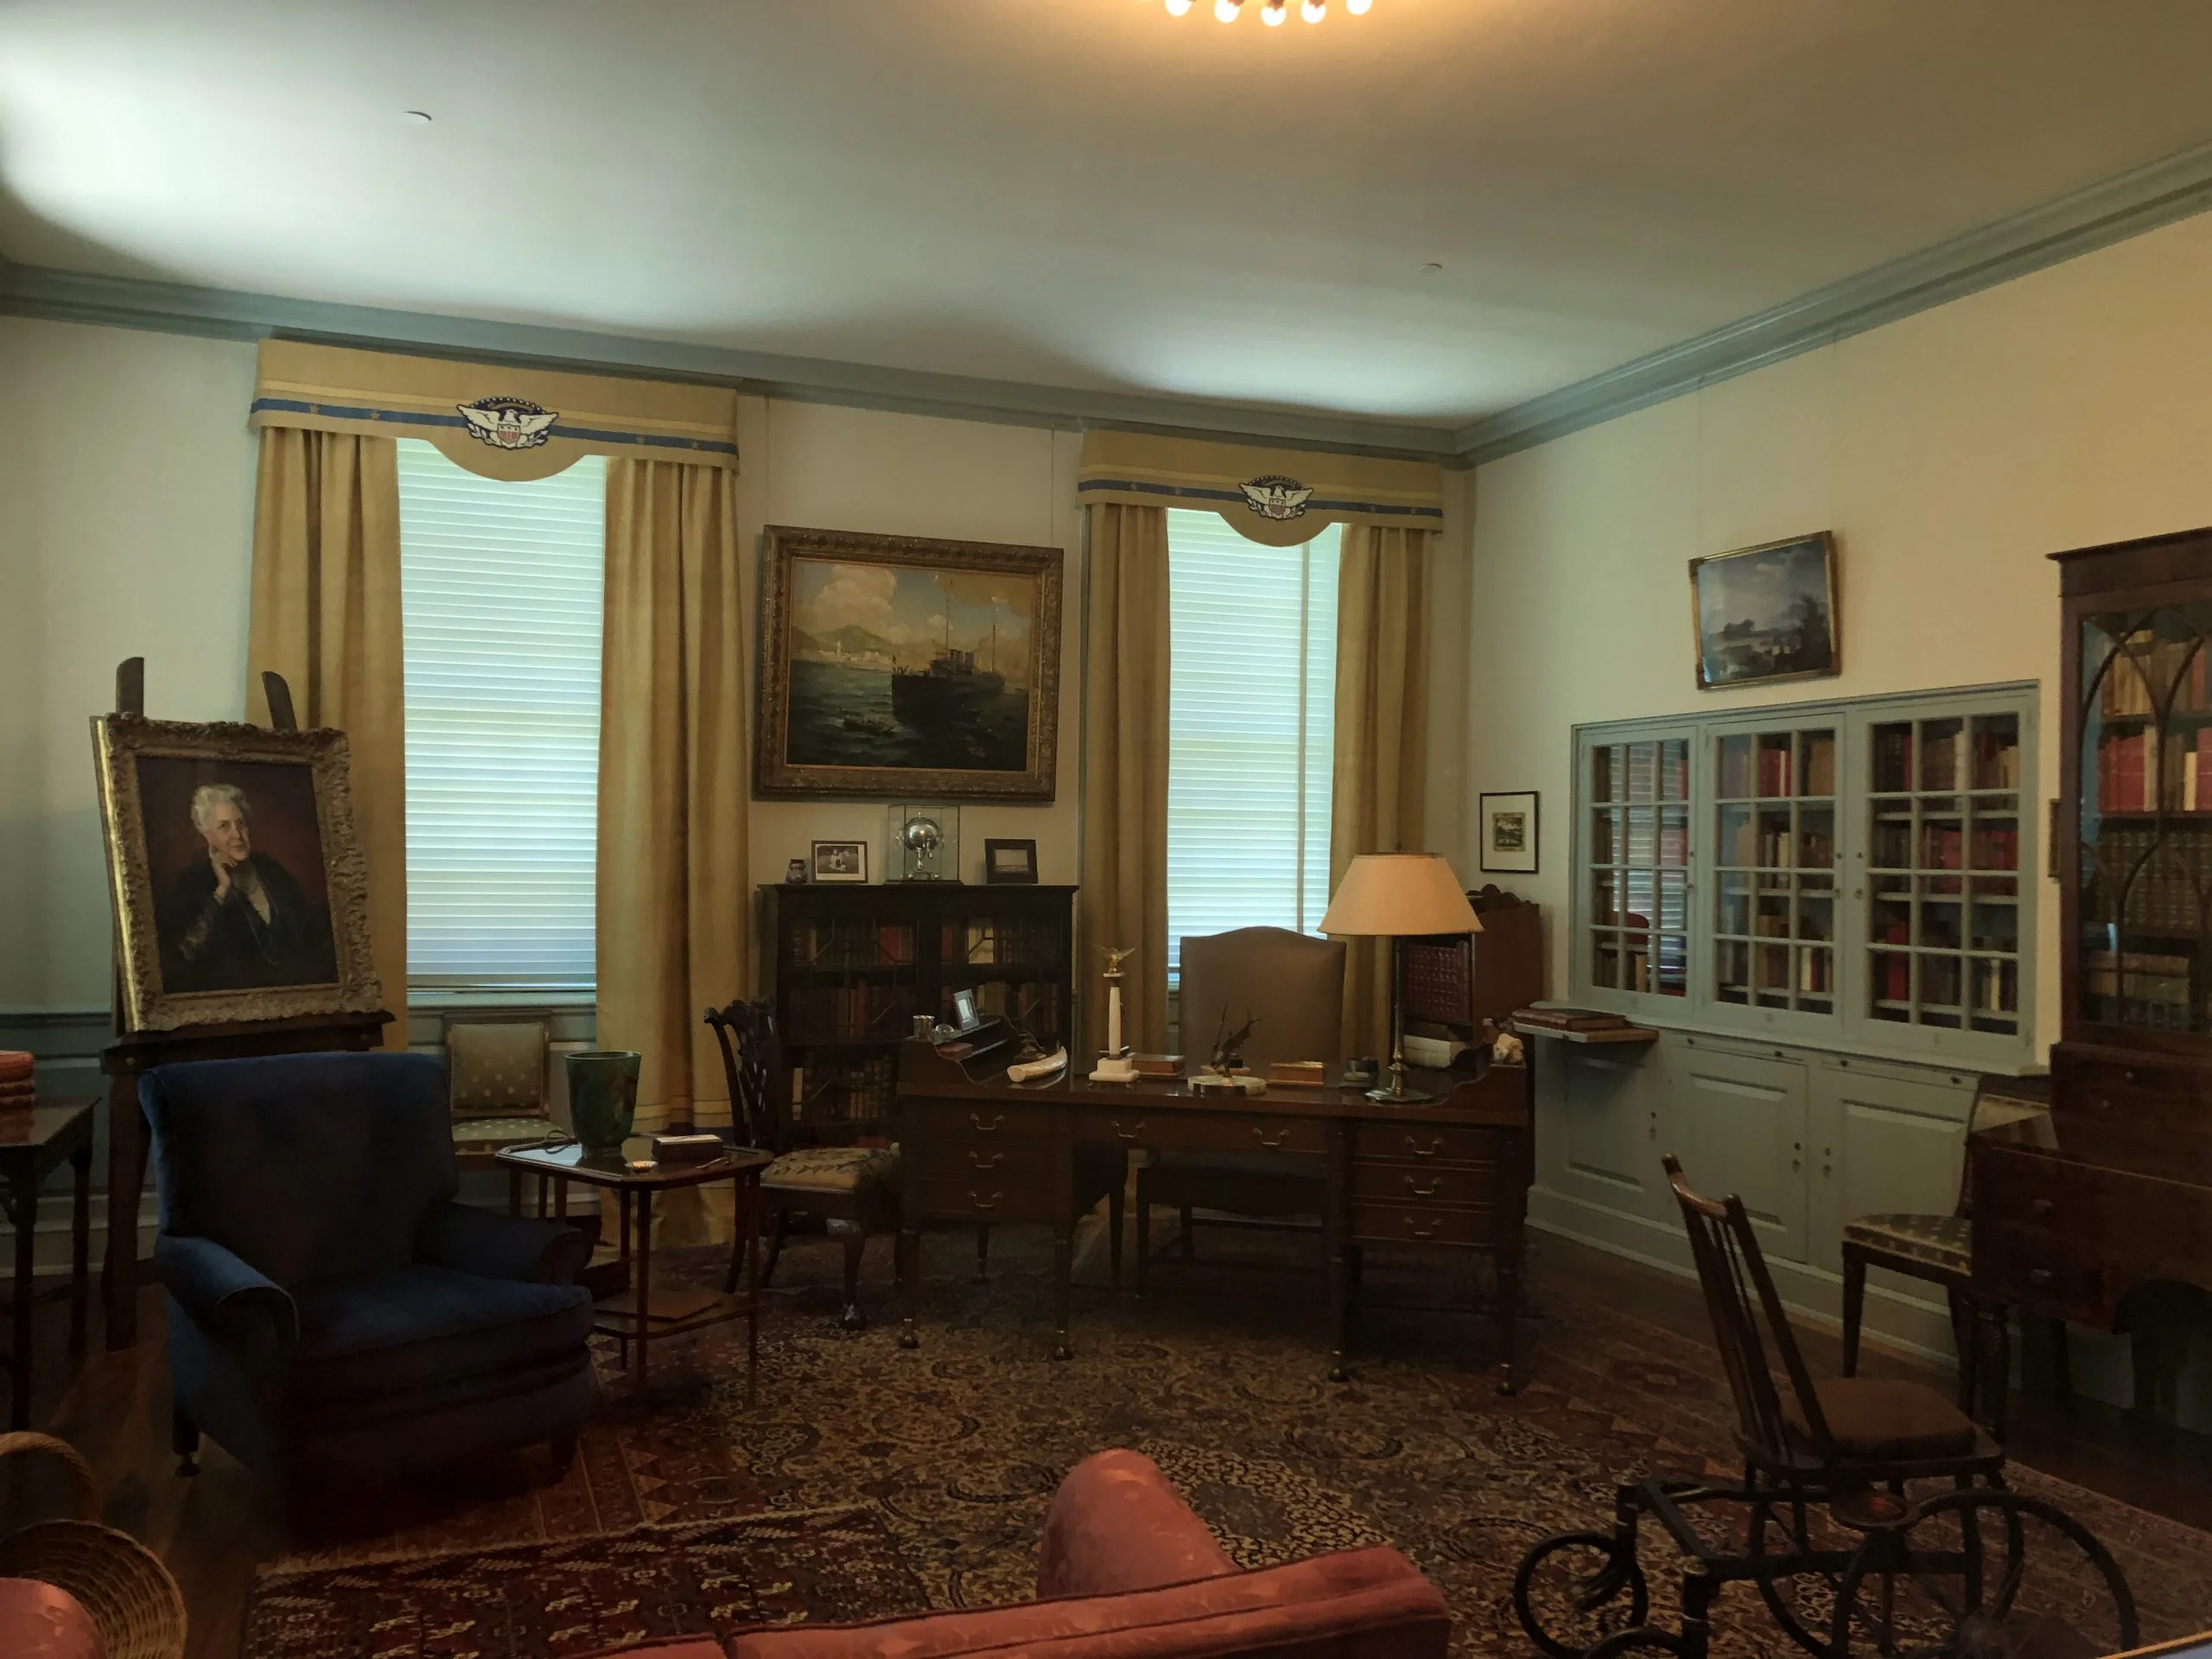 FDR's Private Study in Museum